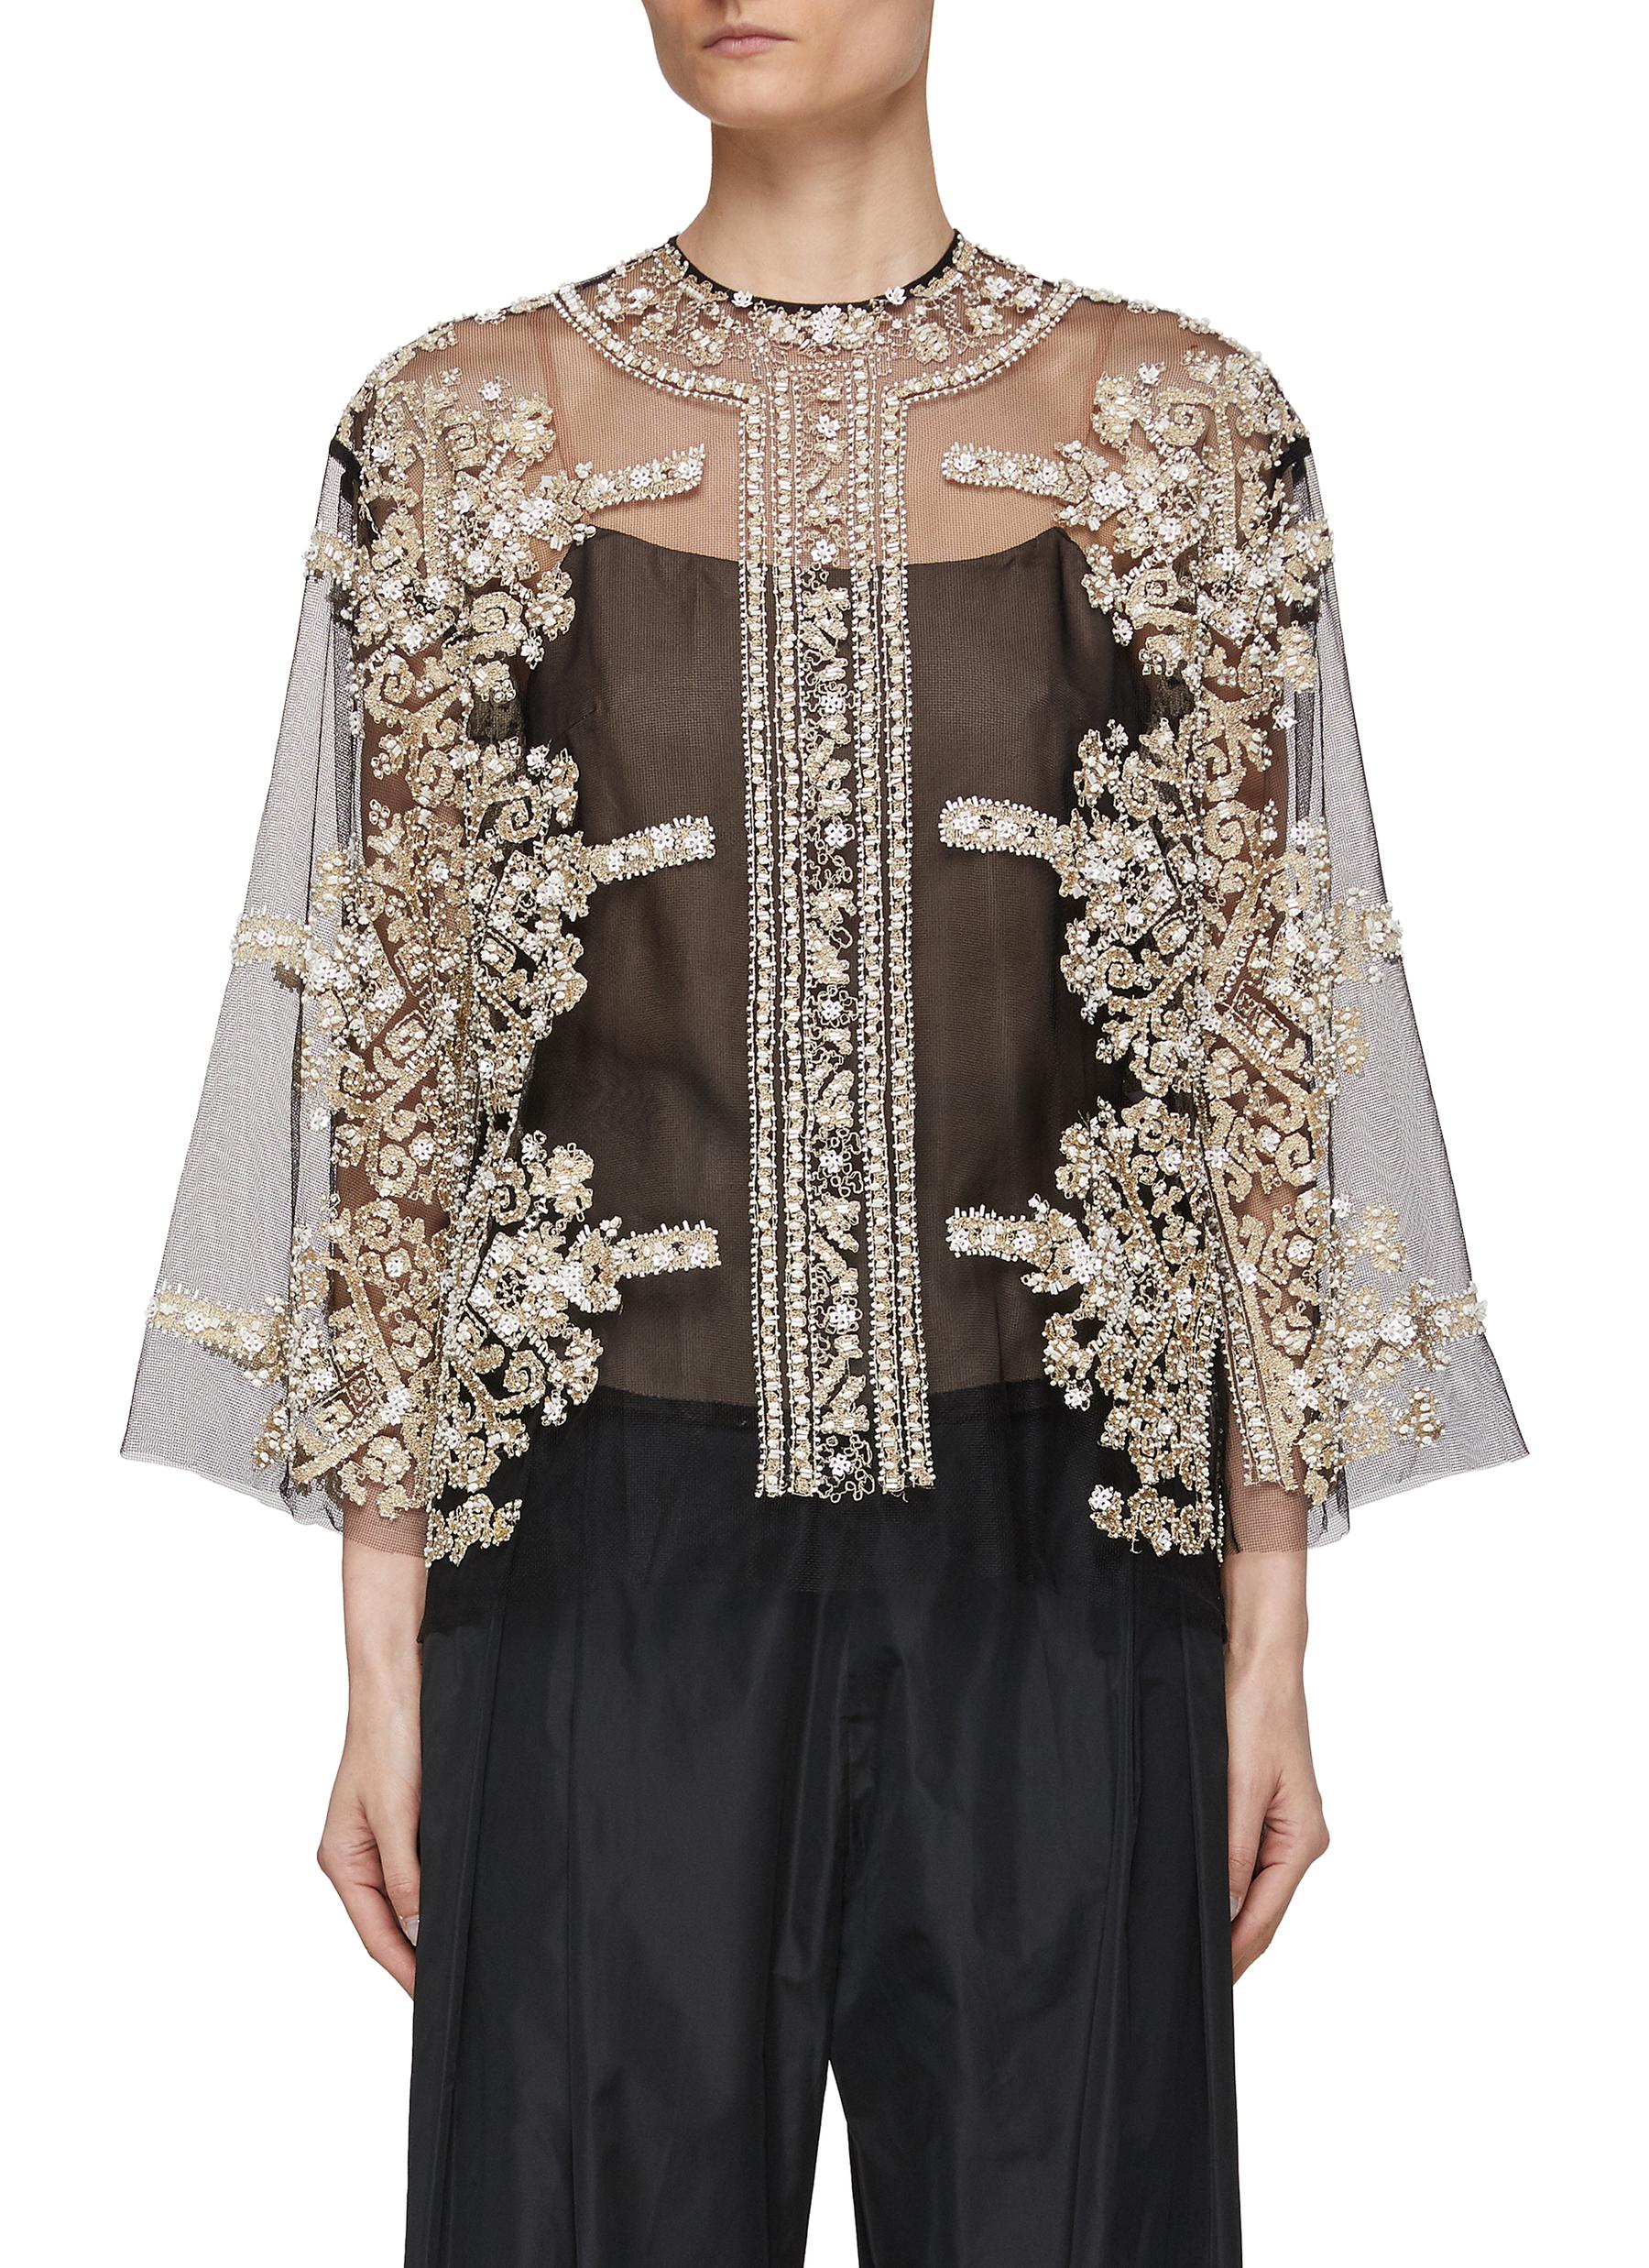 BIYAN Beaded Indian Embroidery Sheer Tulle Top